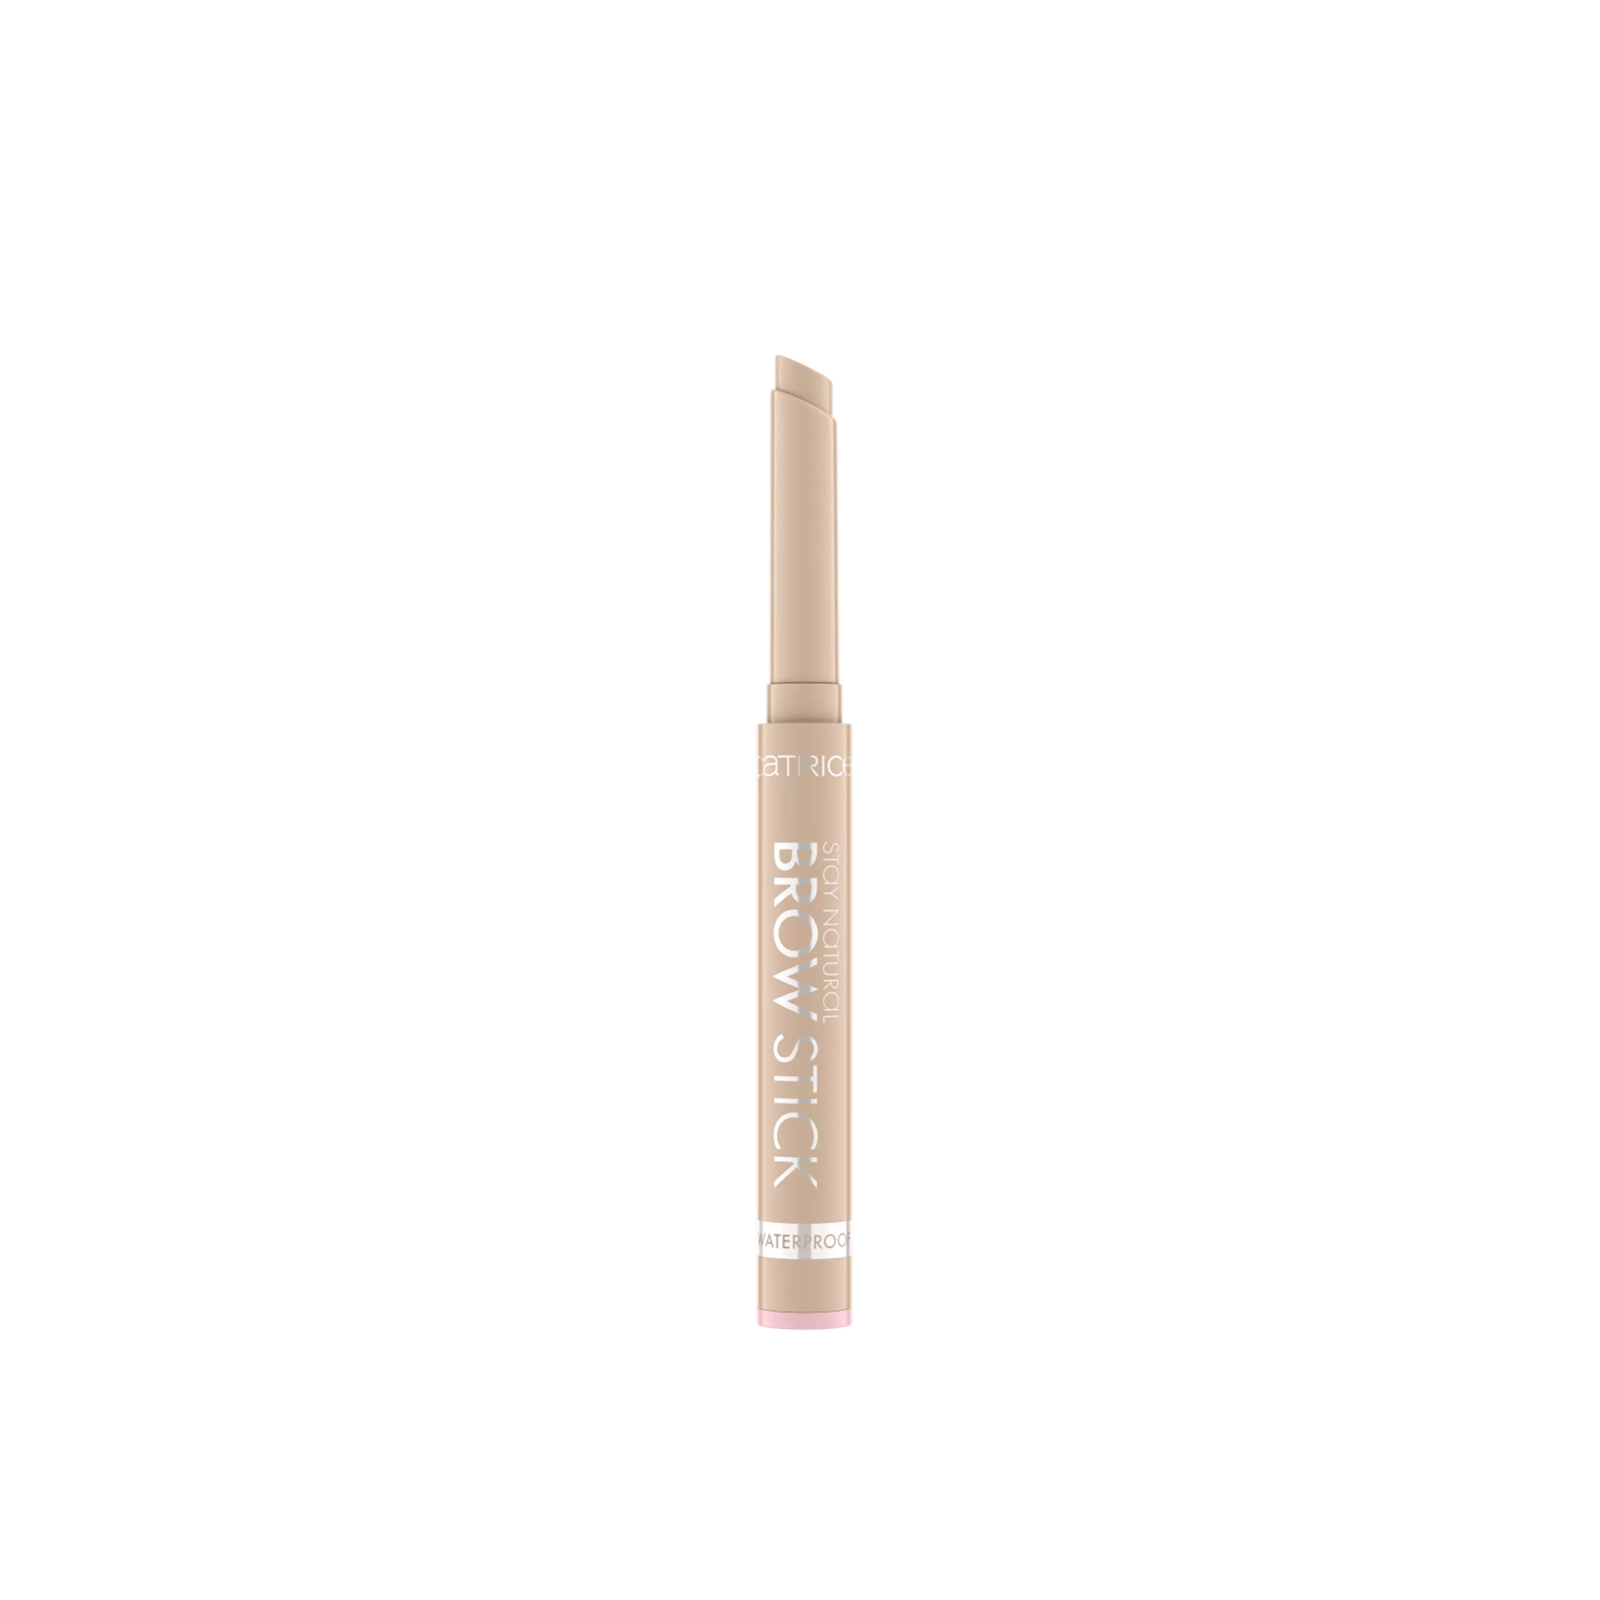 Buy Catrice Stay Natural Waterproof Blonde oz) Stick 010 Soft (0.03 1g · USA Brow